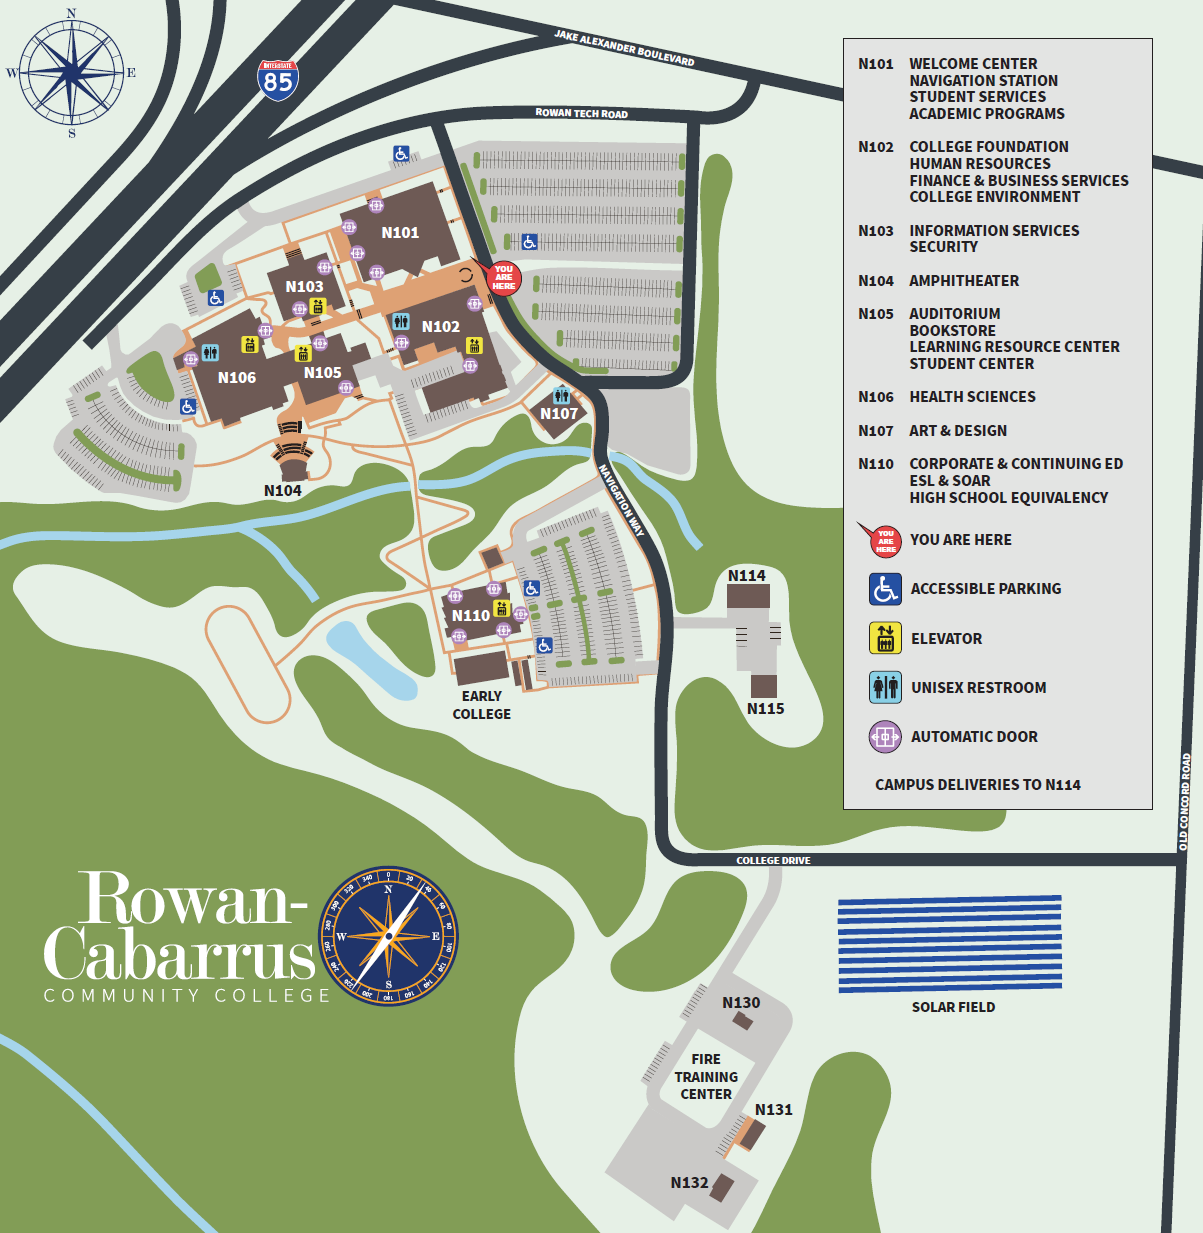 The campus site map.